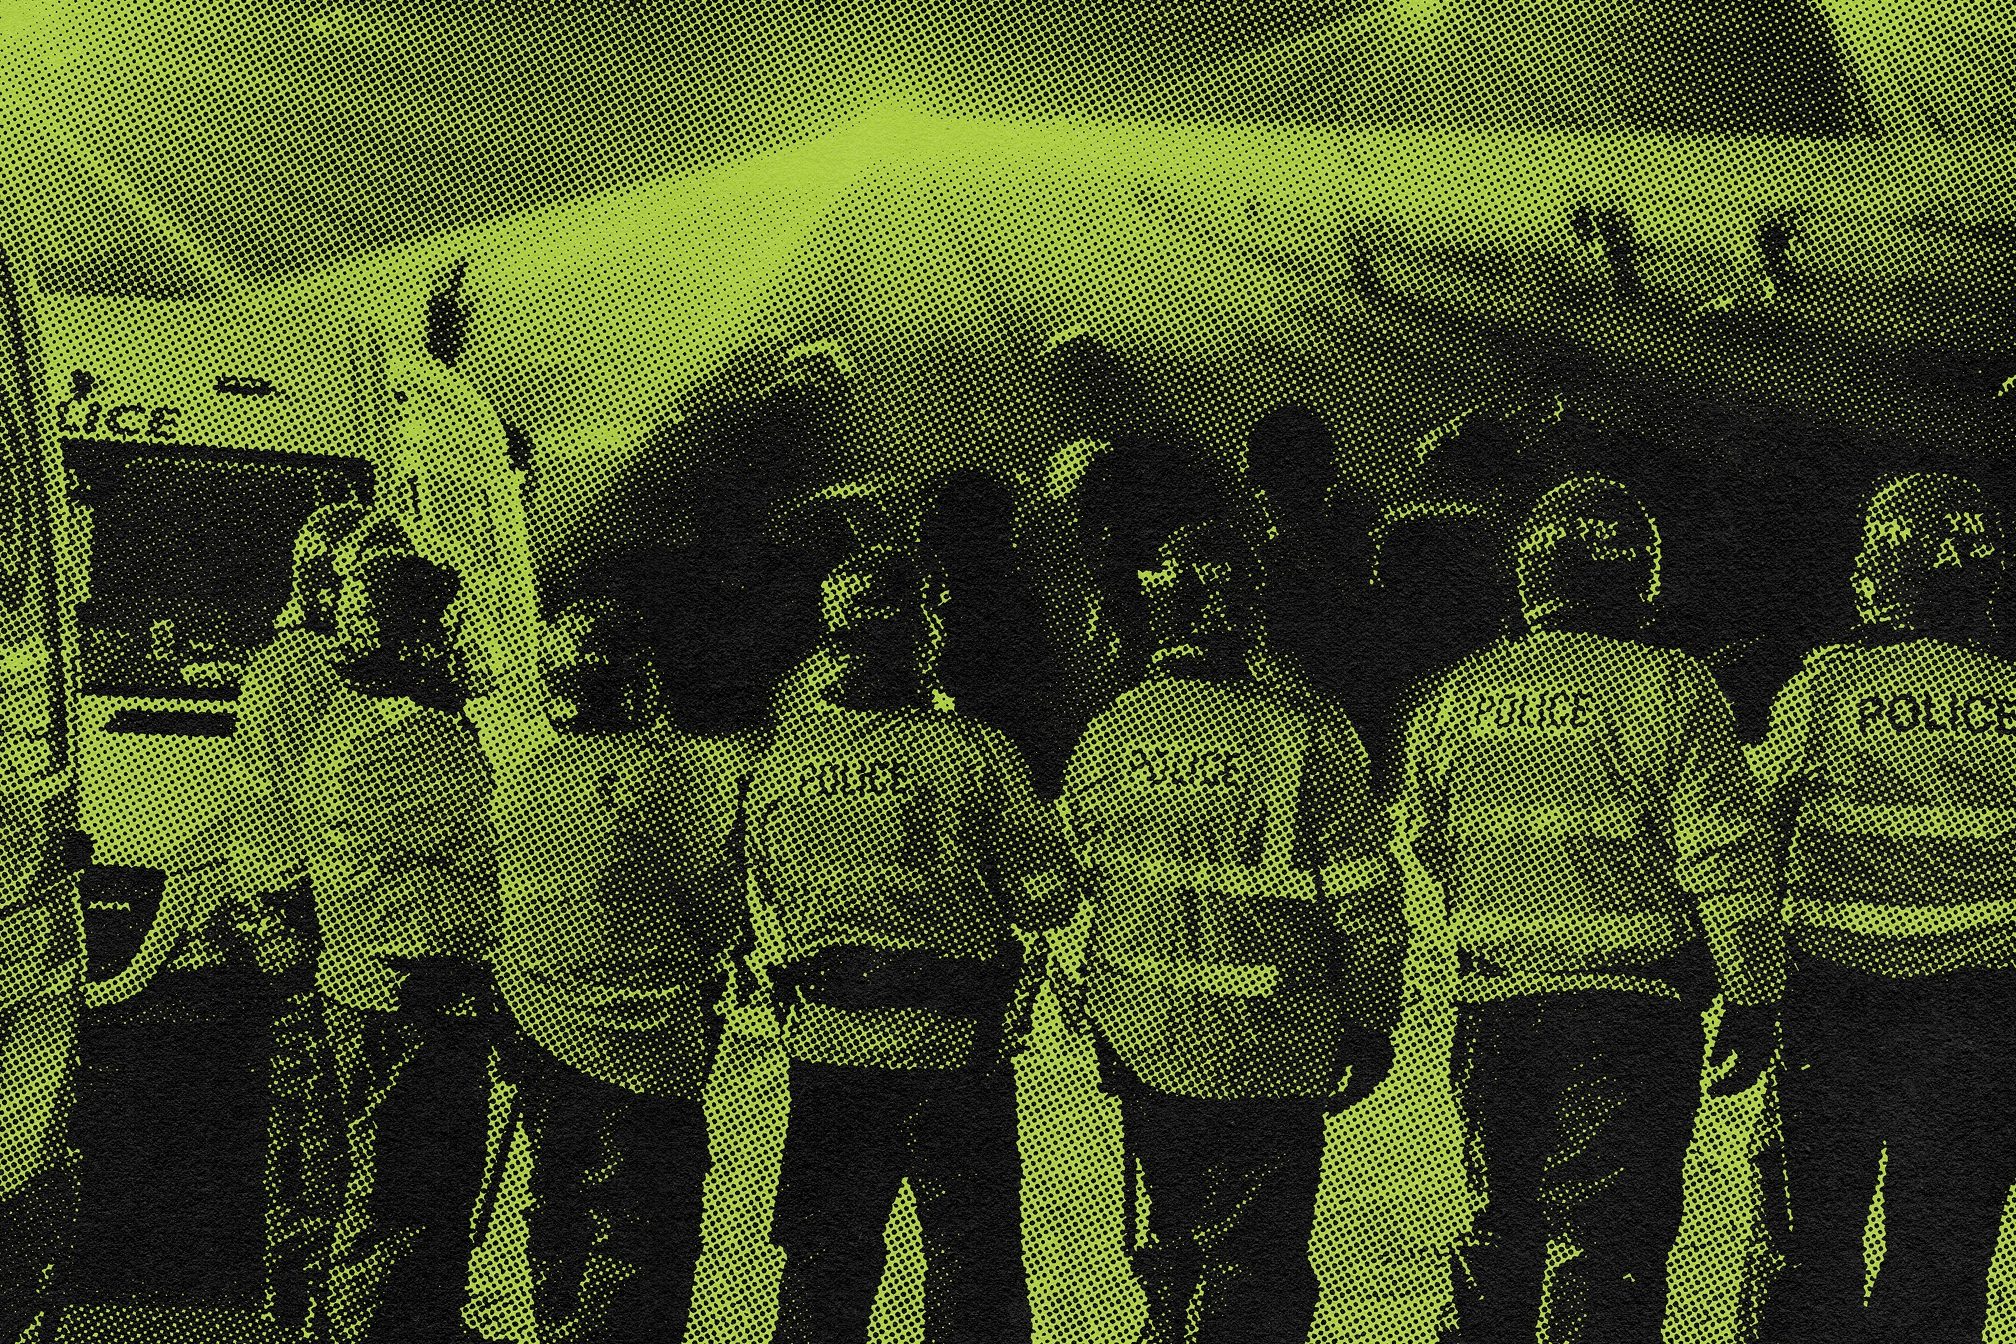 How oppressive policing has eroded rave culture - Features - Mixmag